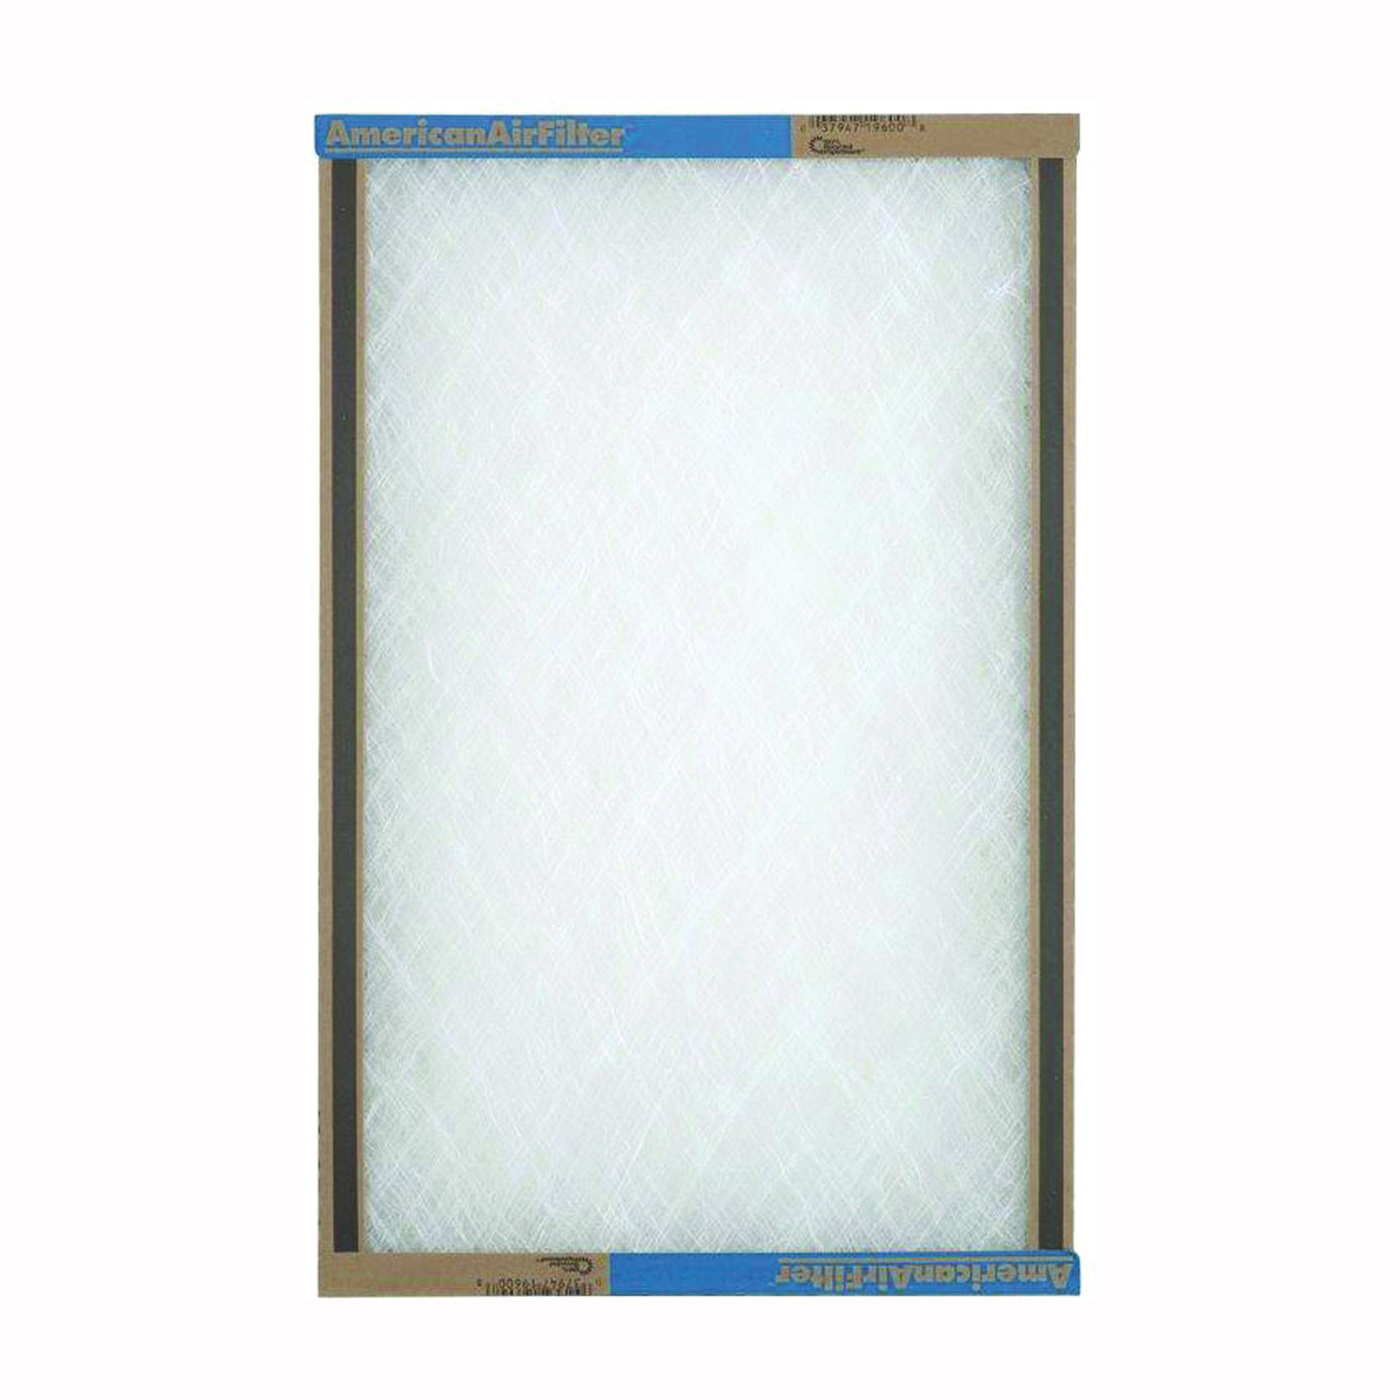 124301 Panel Filter, 30 in L, 24 in W, Chipboard Frame